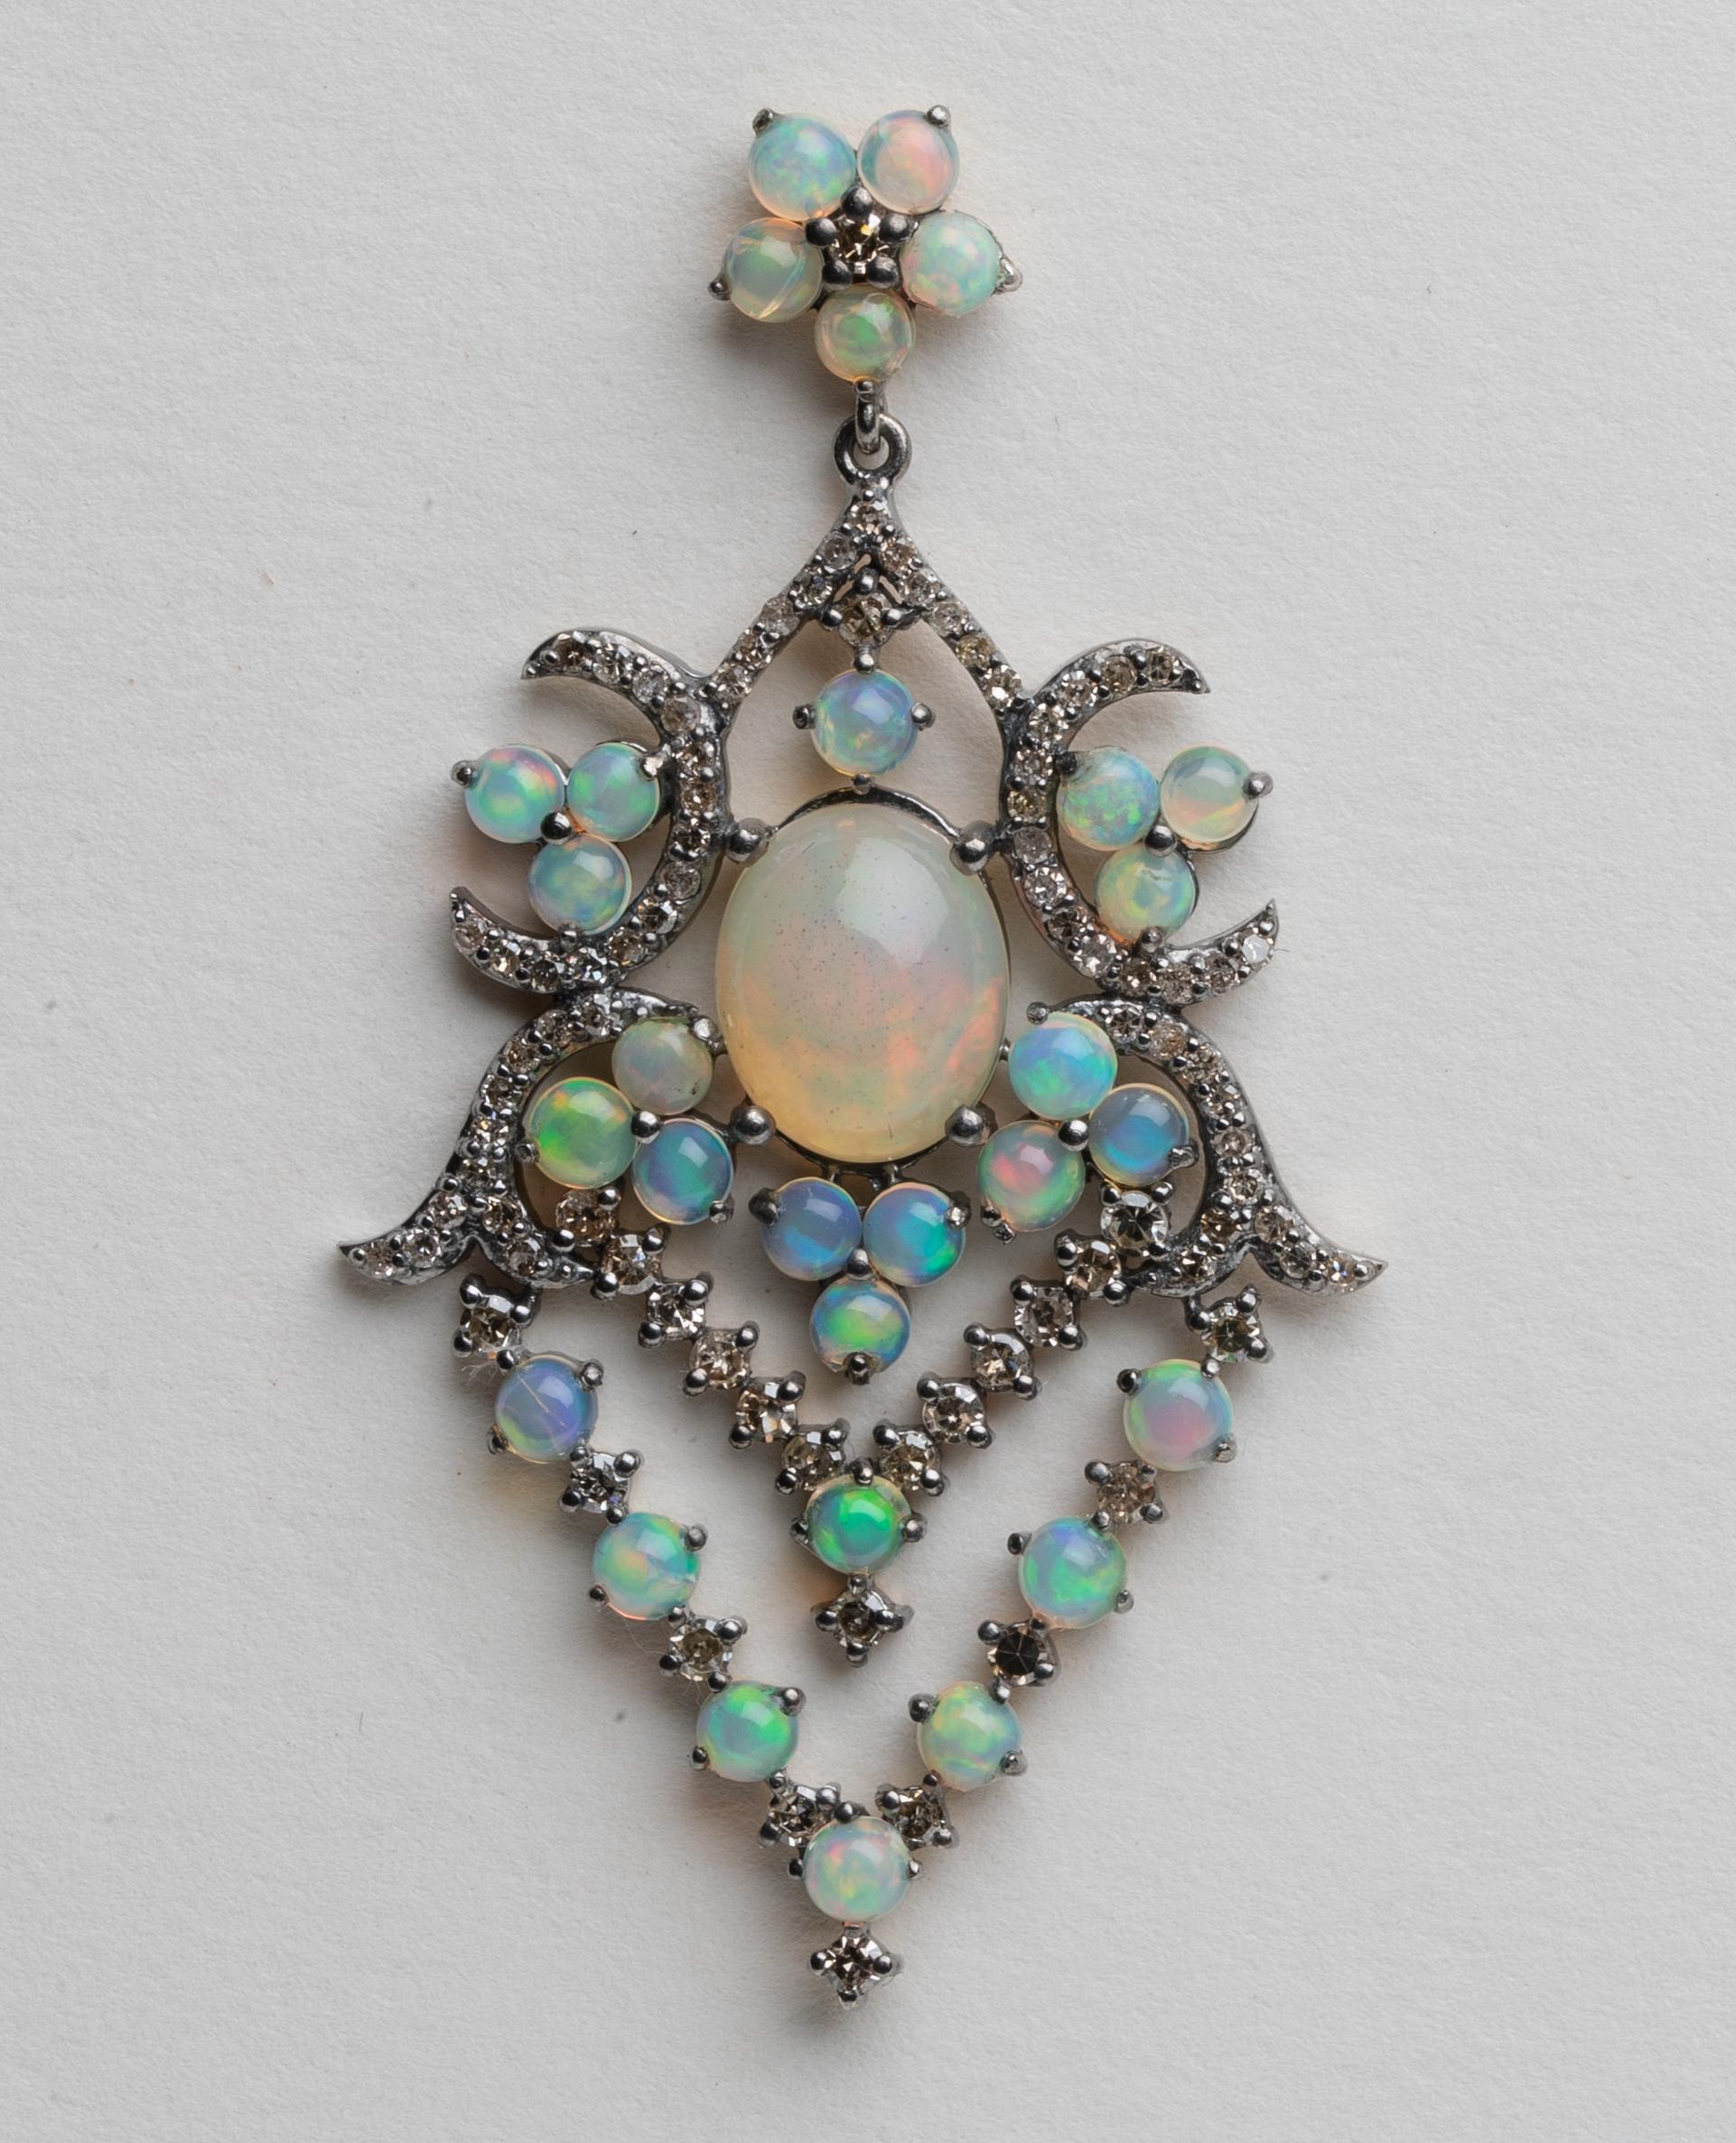 A pair of lovely opal and pave` diamond dangle chandelier earrings.  Diamonds are round cuts and set in an oxidized sterling with 18K gold post for pierced ears.  Post is a subtle flower of opals with diamond center.  Opals with a great fire and